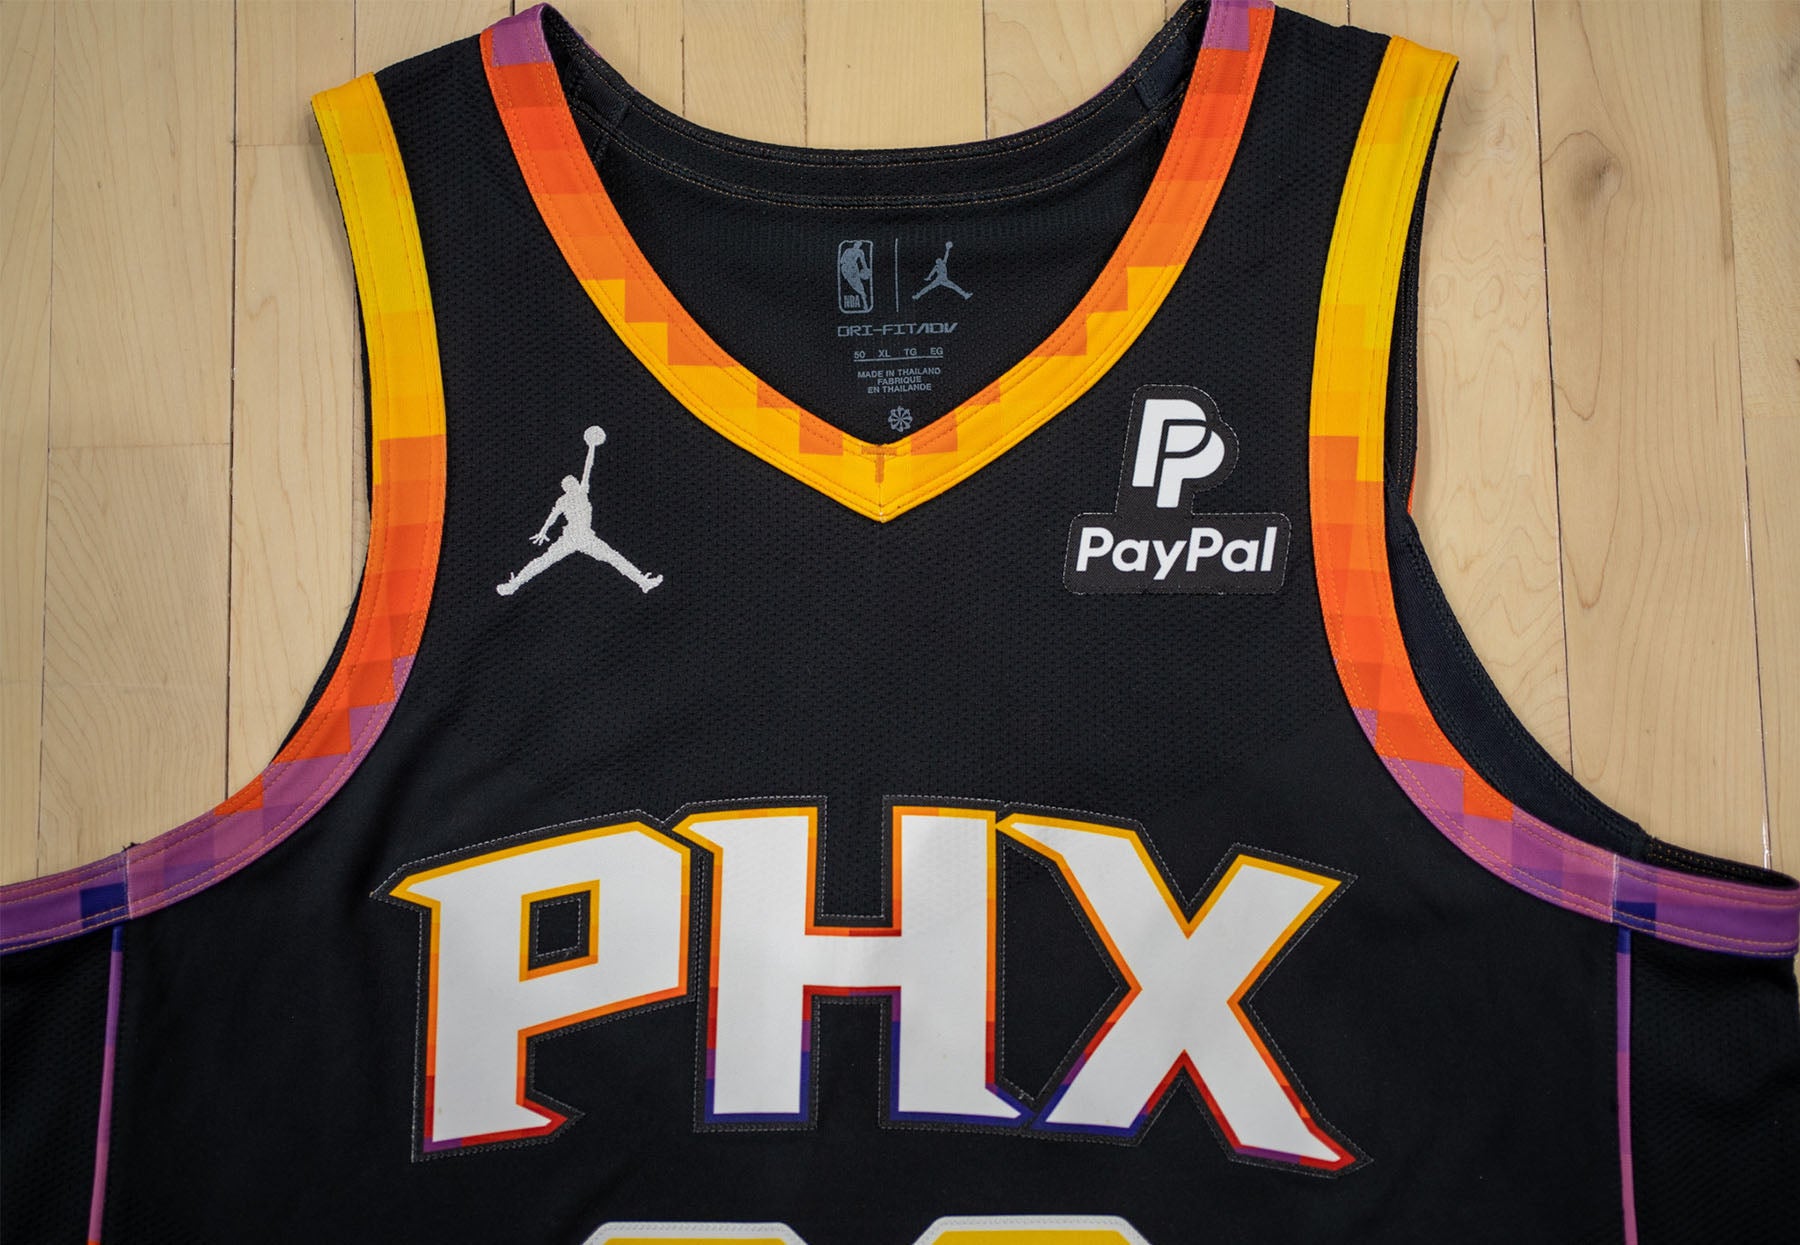 the valley jersey nba